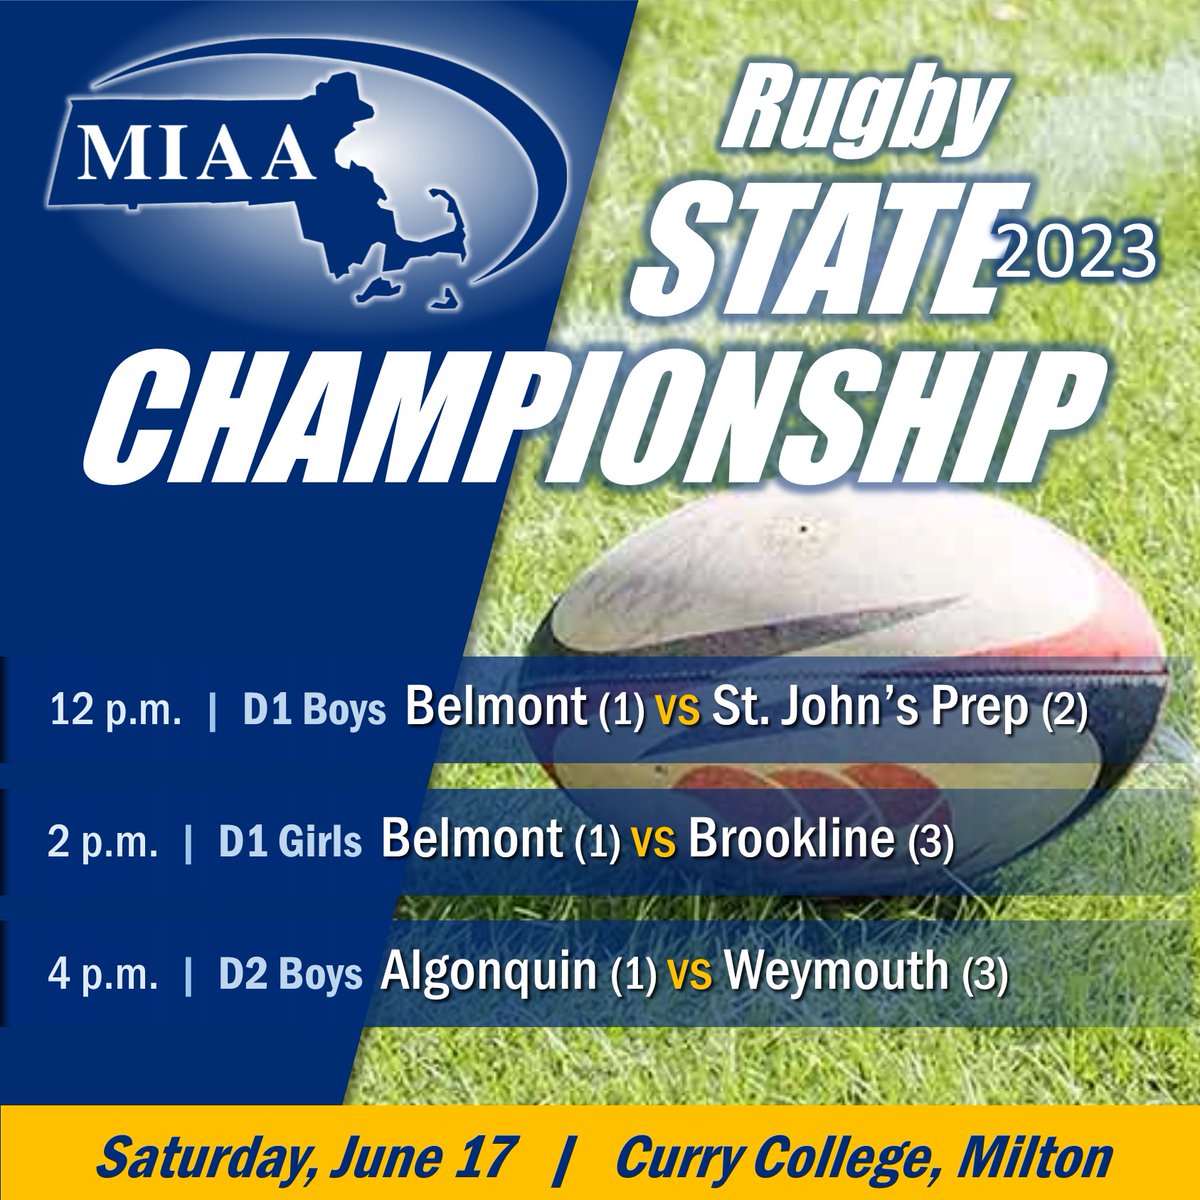 🏆It's Spring 2023 State Championship Week! 

The schedule for Saturday's Boys and Girls Rugby championships at Curry College is set.

🎟️Purchase tickets via GoFan at this link: gofan.co/app/school/MIA…

@bhsmarauders @bhs_warriors @sjpathletics @ARHSAthletics @wildcatnationAD